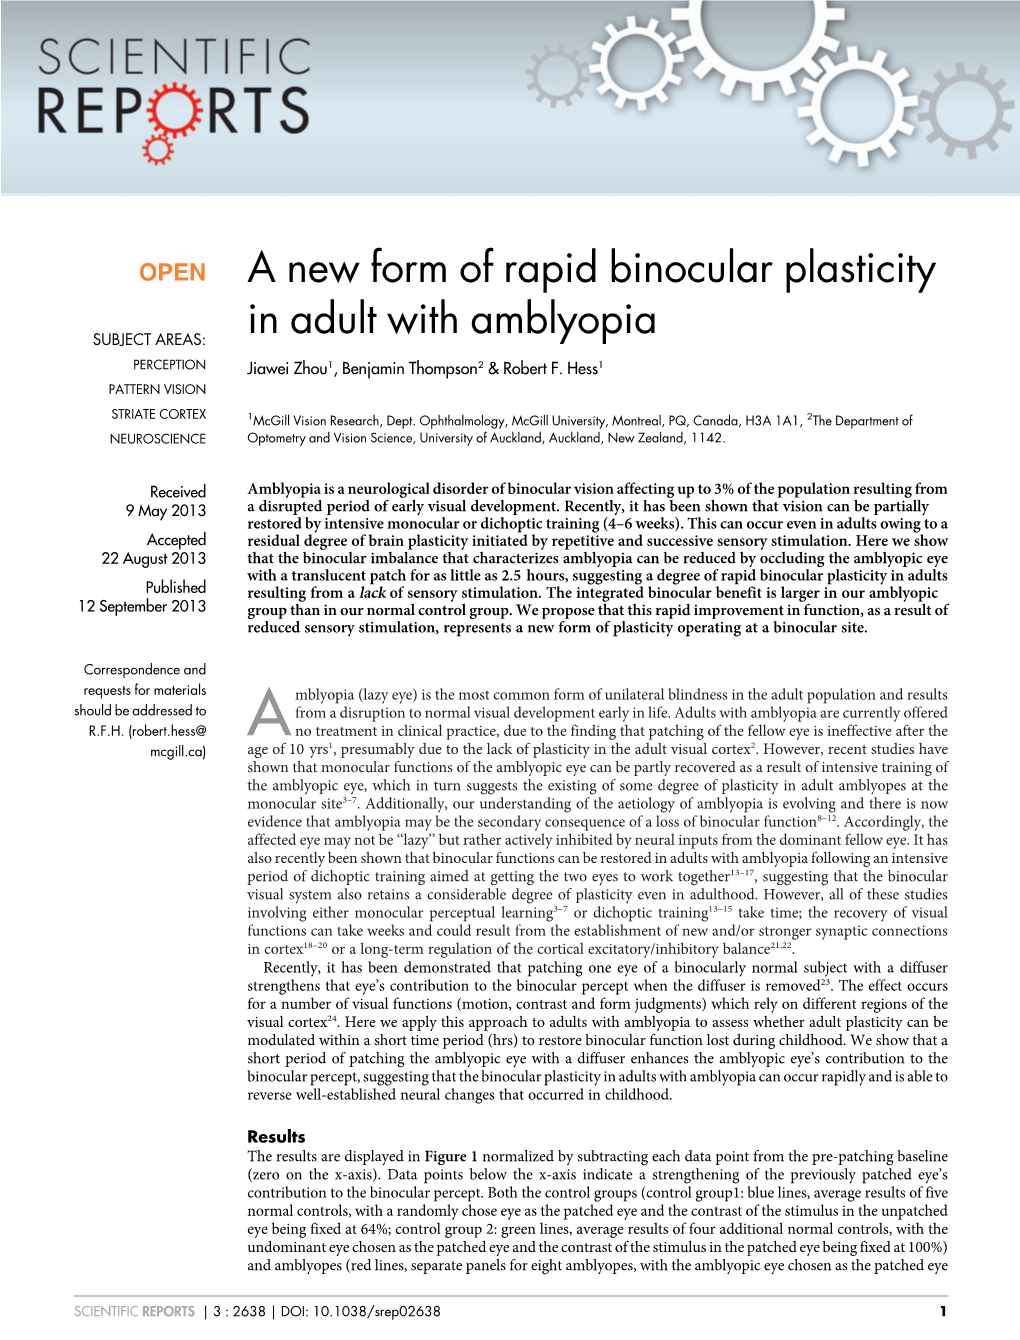 A New Form of Rapid Binocular Plasticity in Adult with Amblyopia